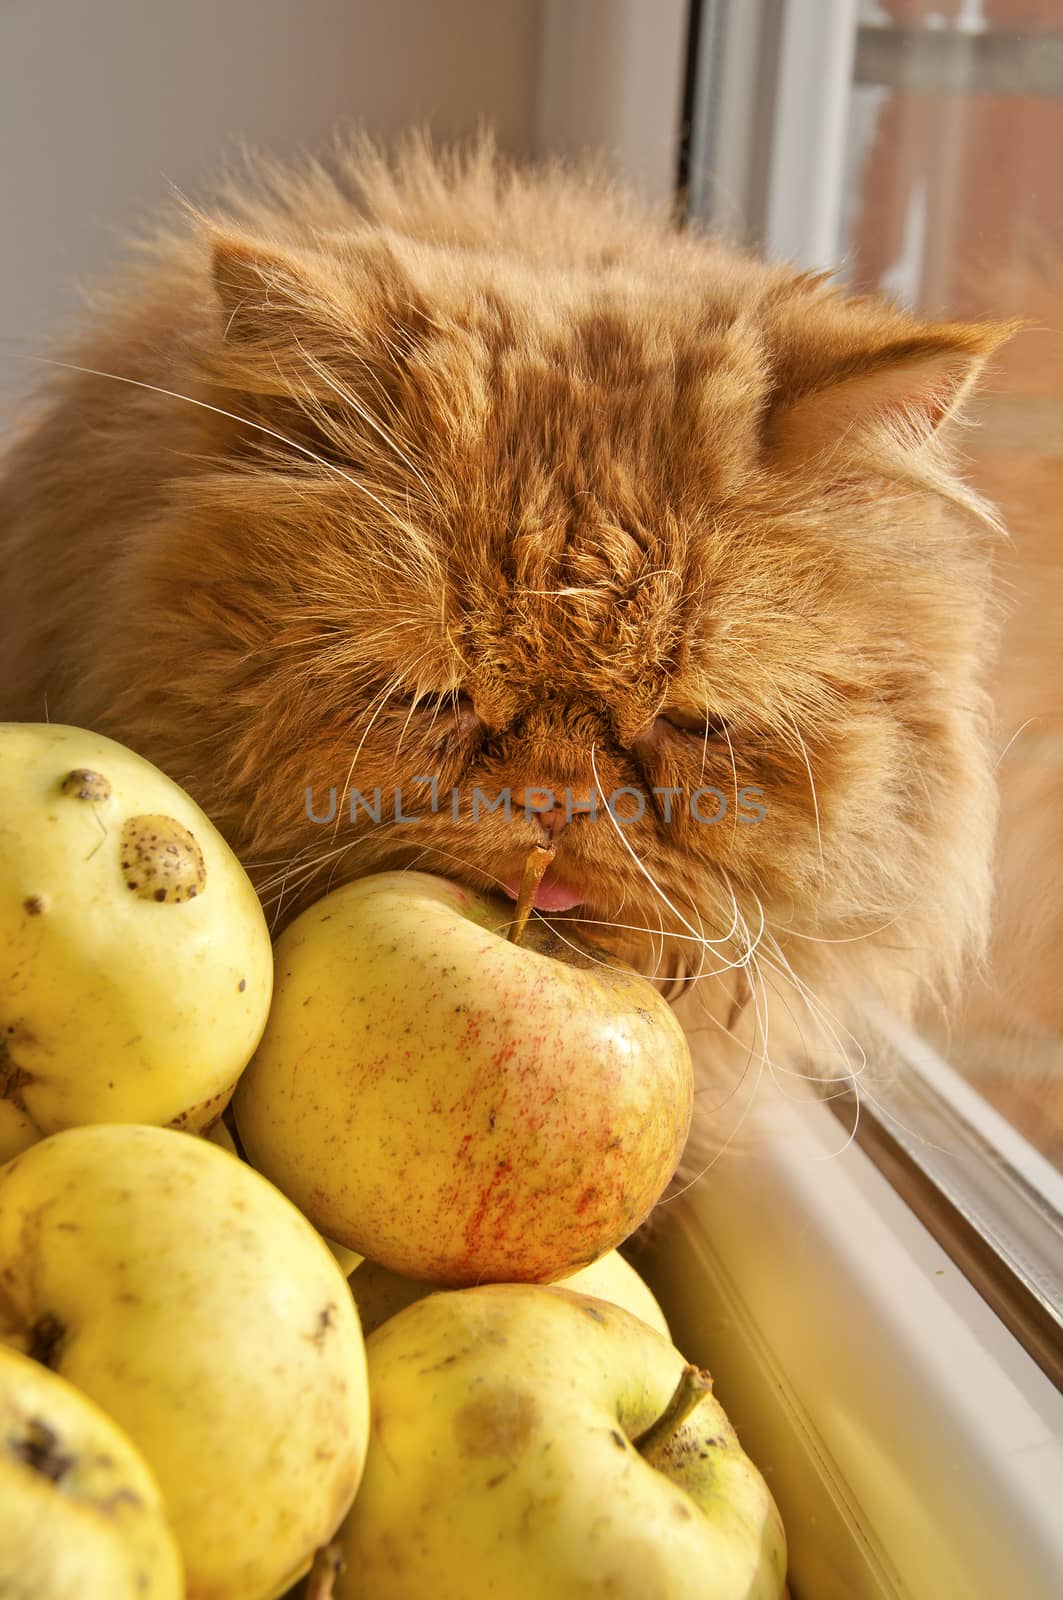 Red cat sitting on windowsill near apples and looking out the window at the autumn landscape. Big red Persian cat.